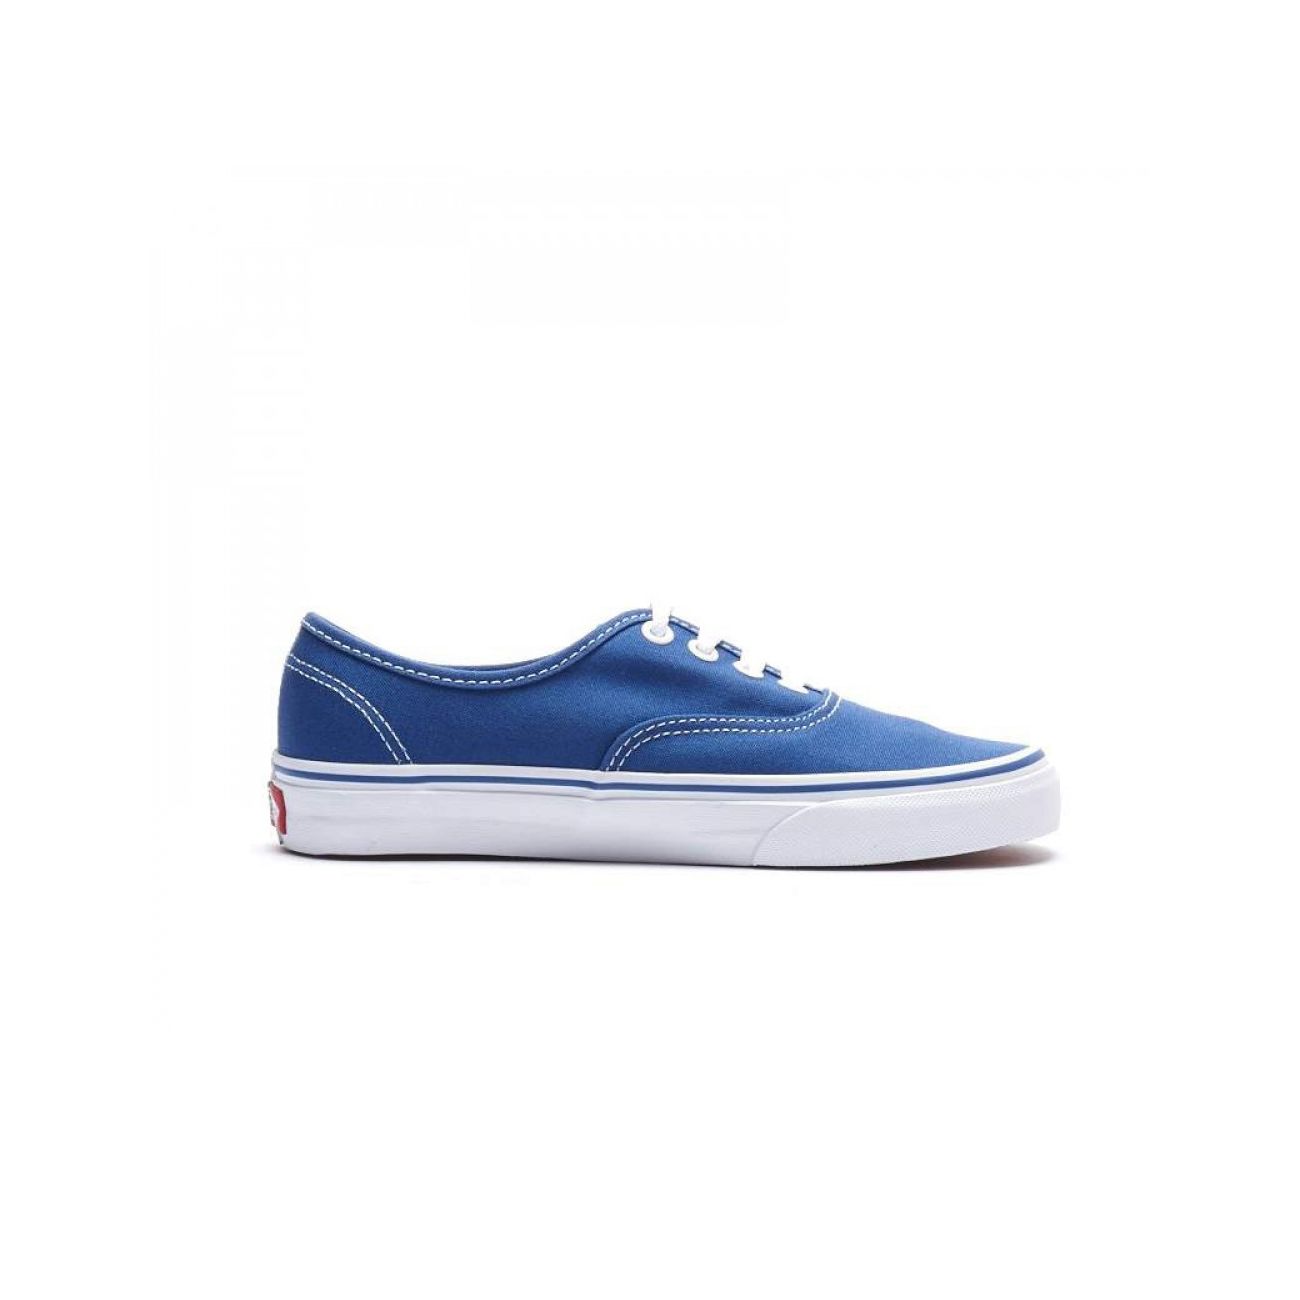 Buy Vans Authentic Lite Plus, Unisex Adults' Low-top Sneakers Blue  (Canvas/stv Navy) 12 UK at Amazon.in